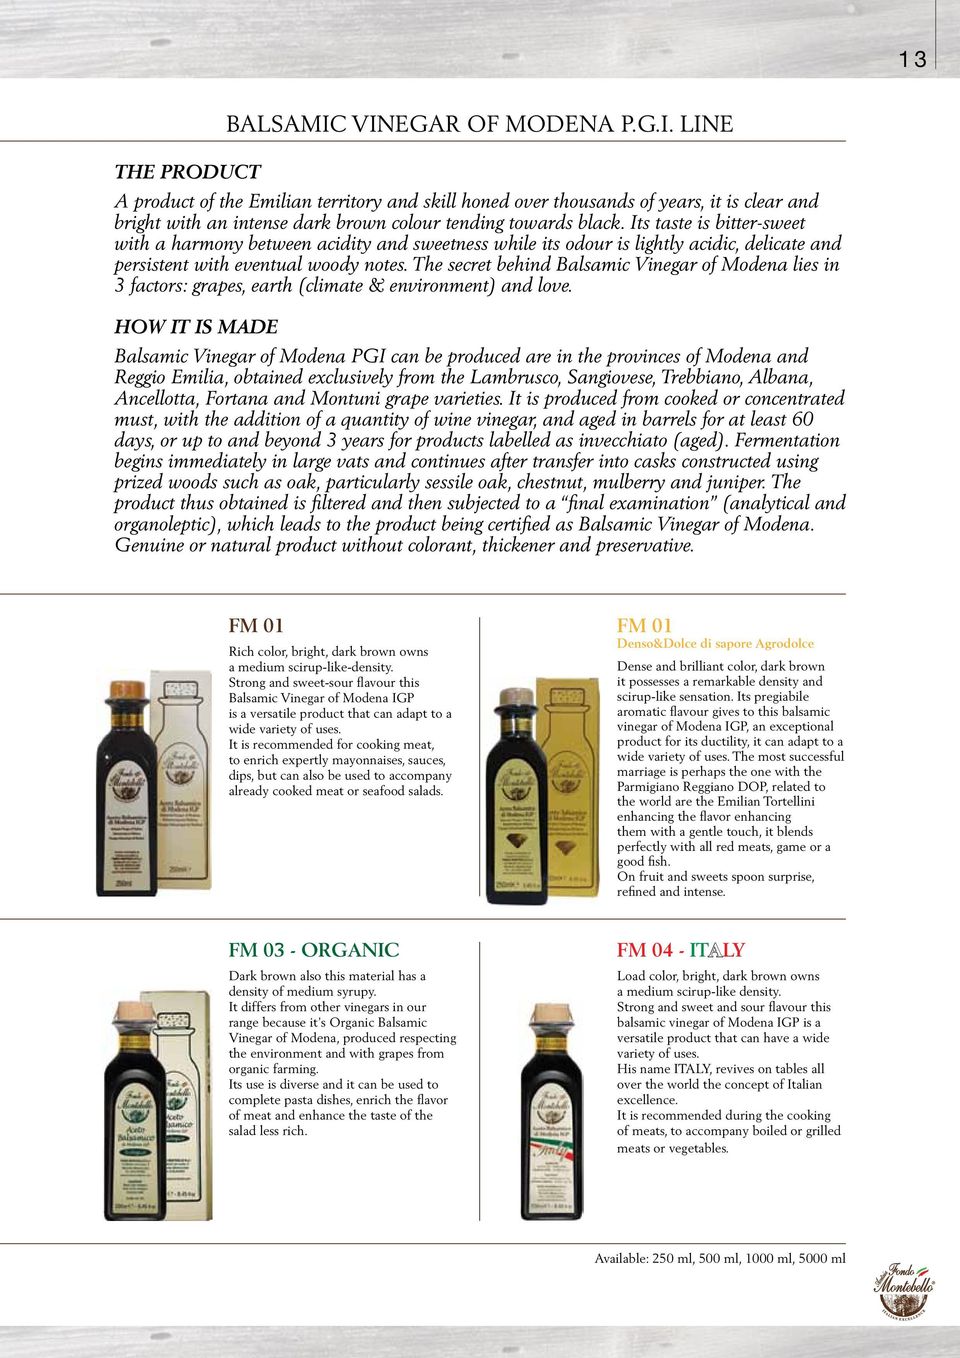 The secret behind Balsamic Vinegar of Modena lies in 3 factors: grapes, earth (climate & environment) and love.